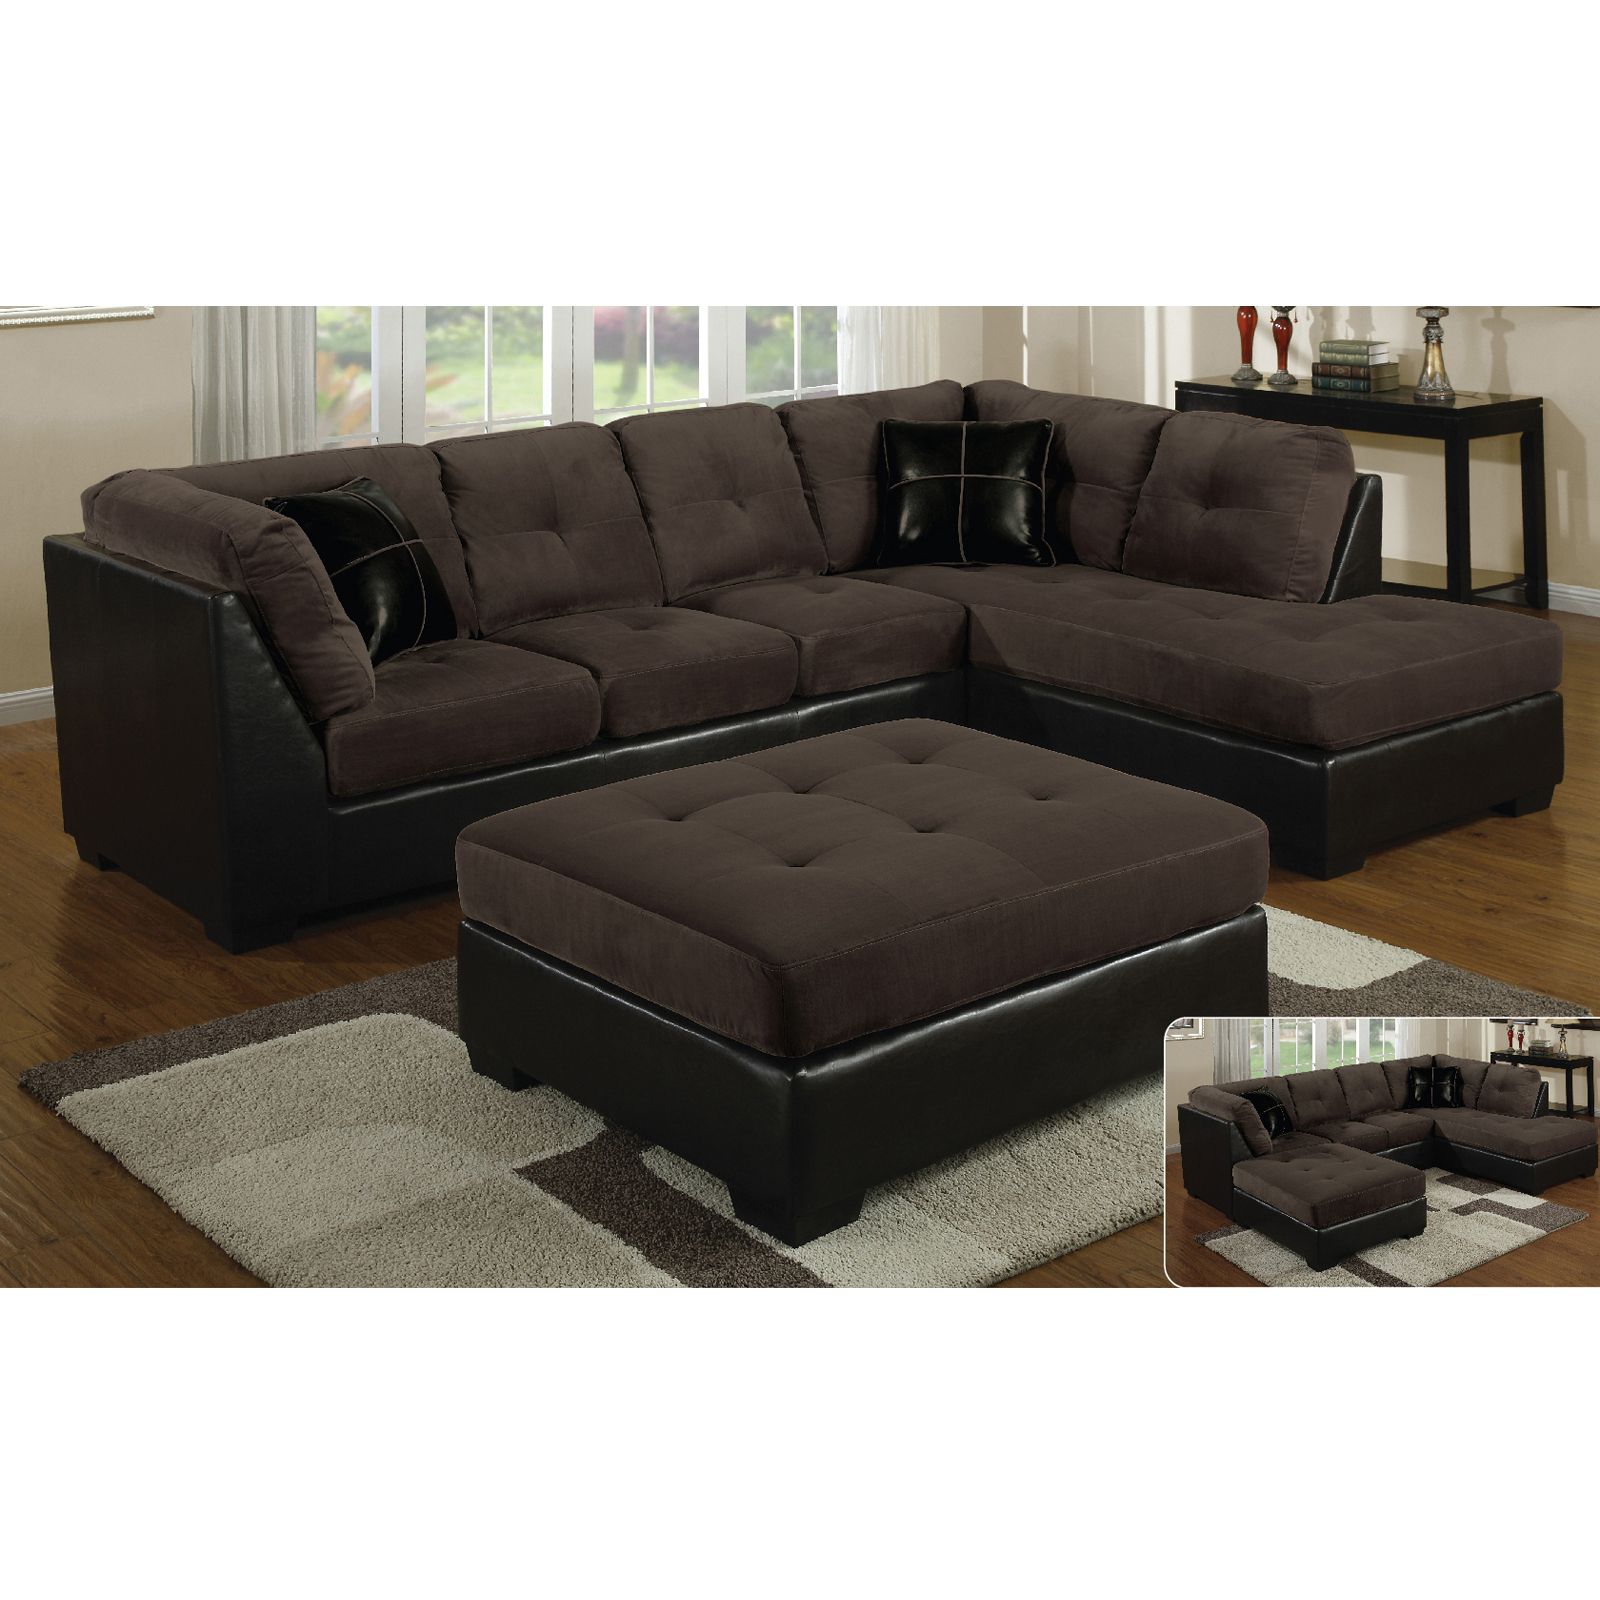 E Motion Furniture Right Tufted Chaise Sectional Inside Hannah Right Sectional Sofas (View 4 of 15)